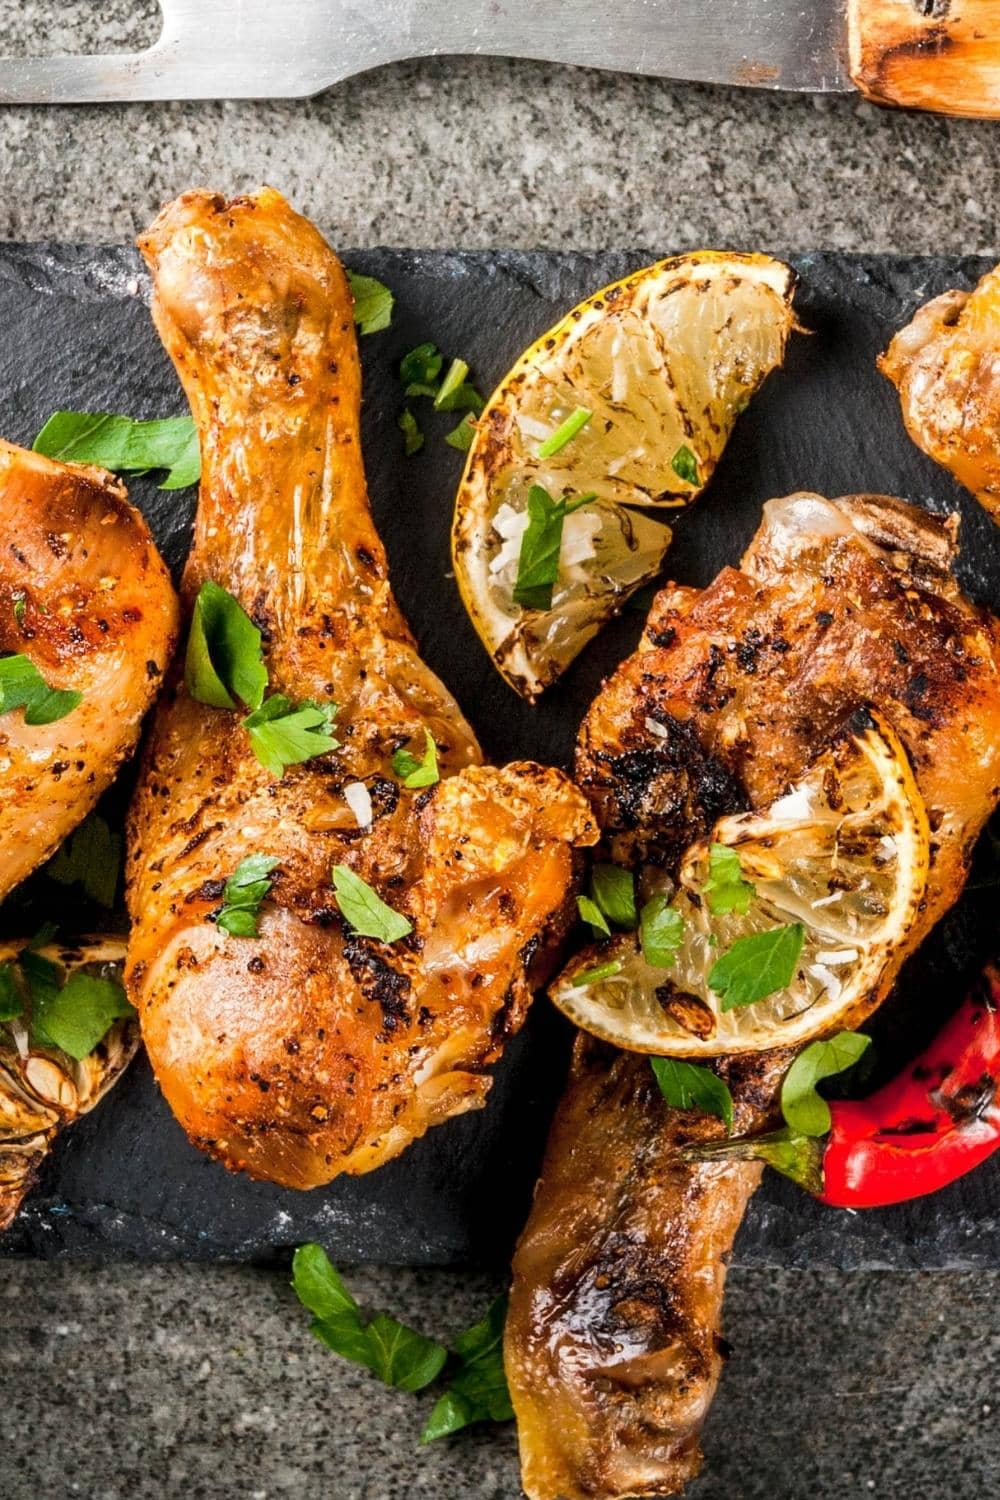 30 Best Christmas Chicken Recipes for Your Holiday Feast - Insanely Good